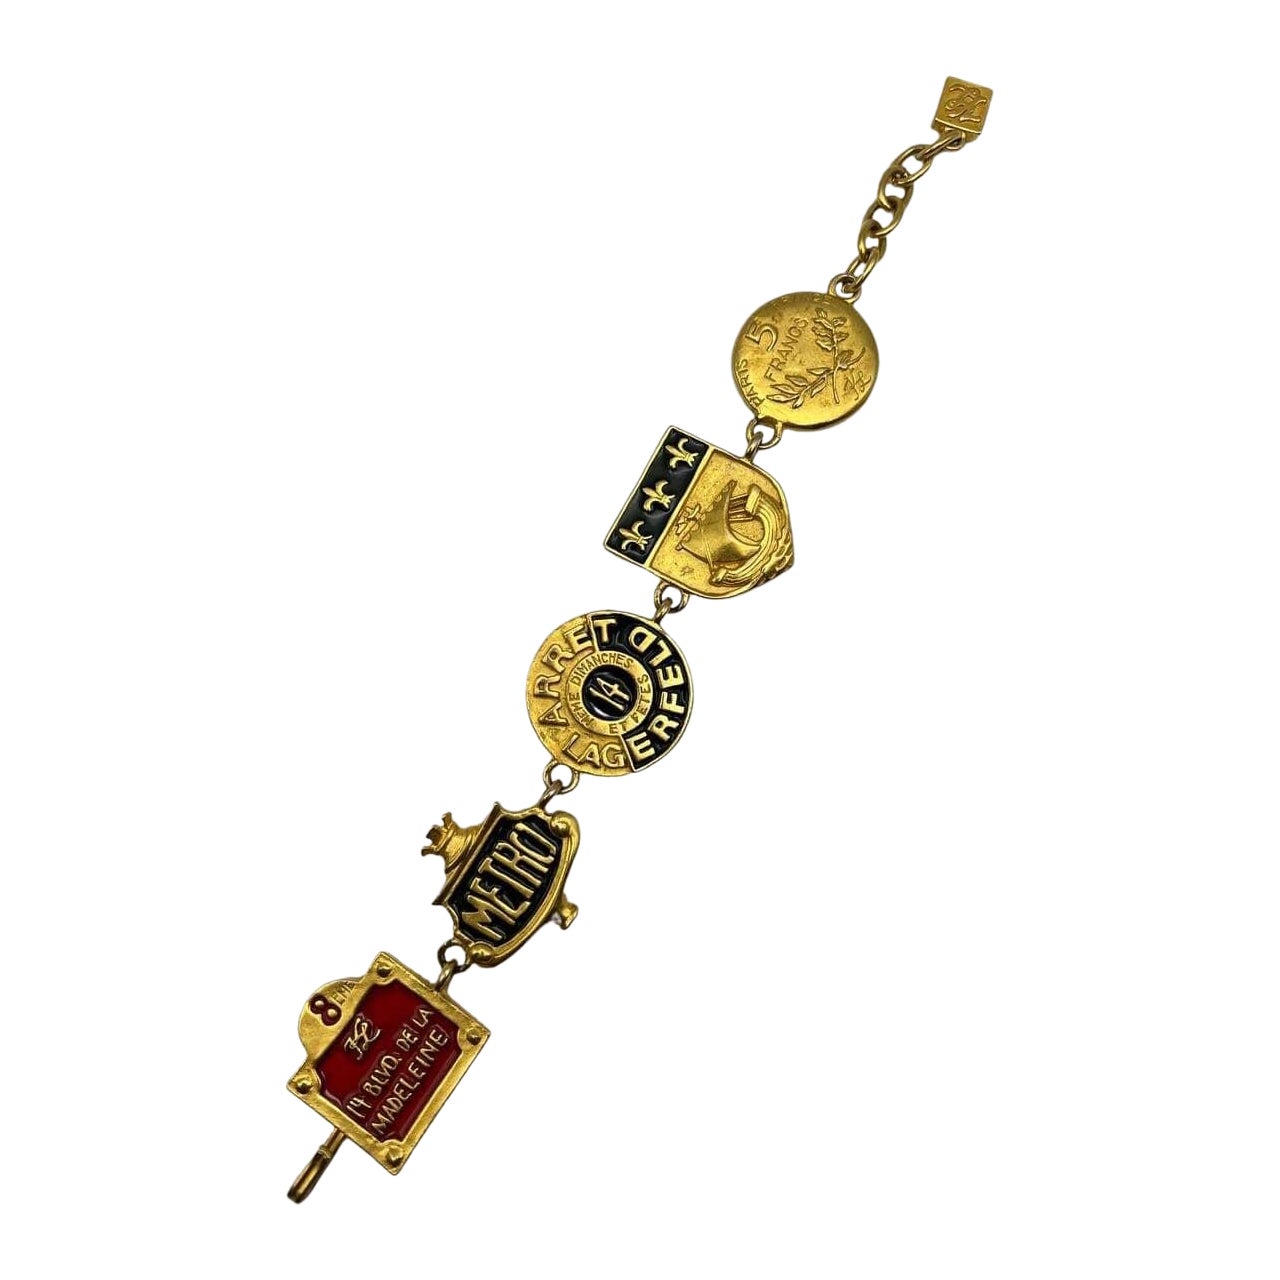 Karl Lagerfeld Jewelry: Necklaces & More - 188 For Sale at 1stdibs